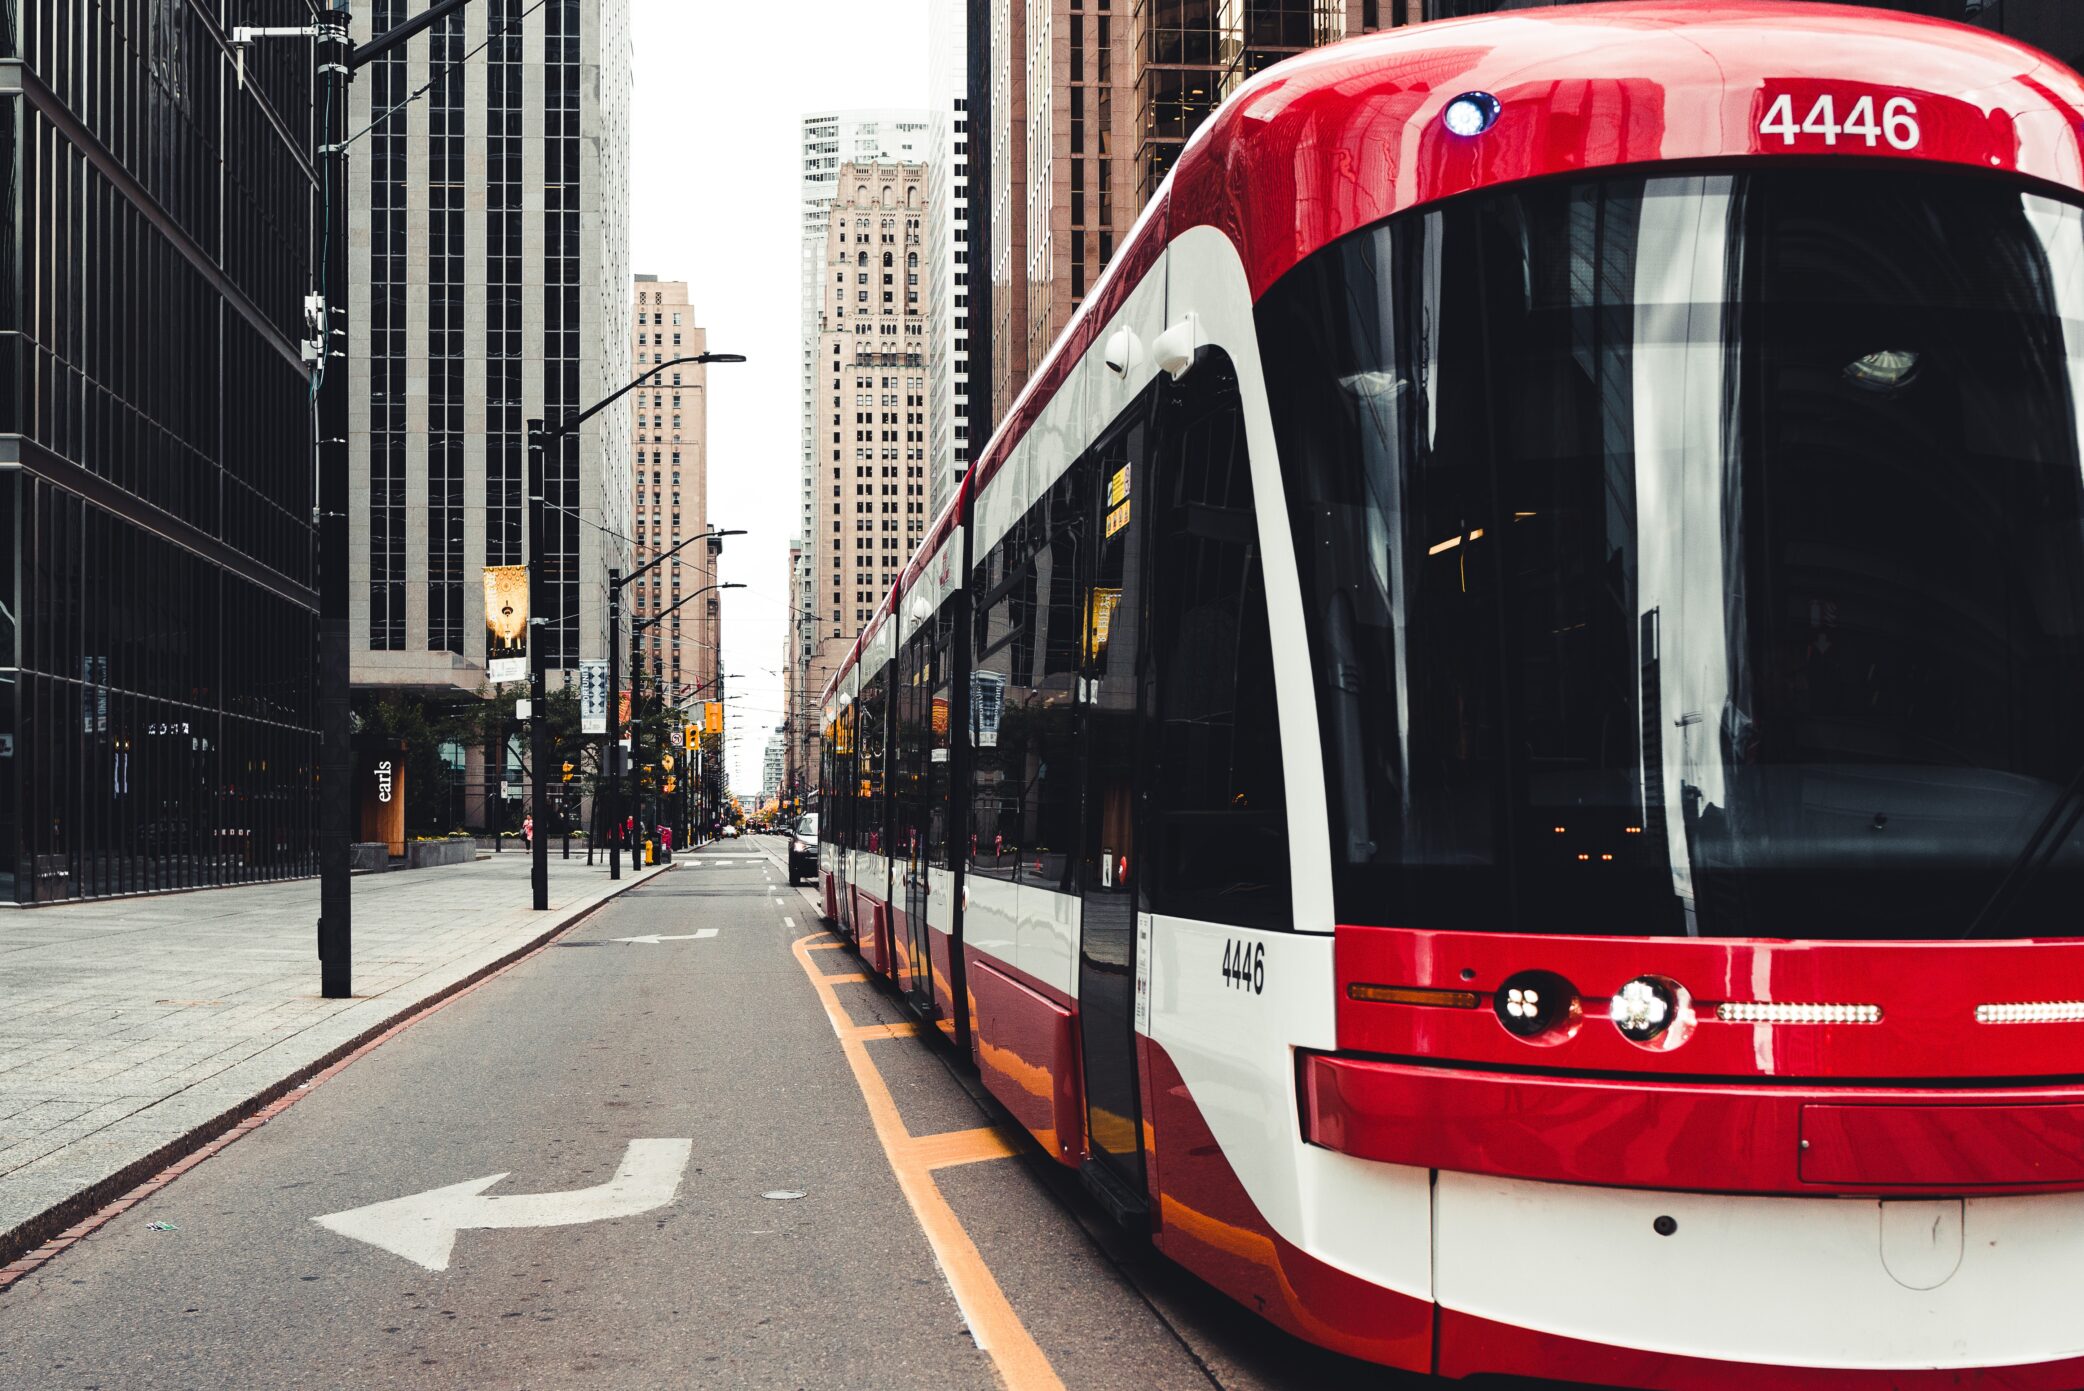 Image of a Toronto streetcar driving down a street.